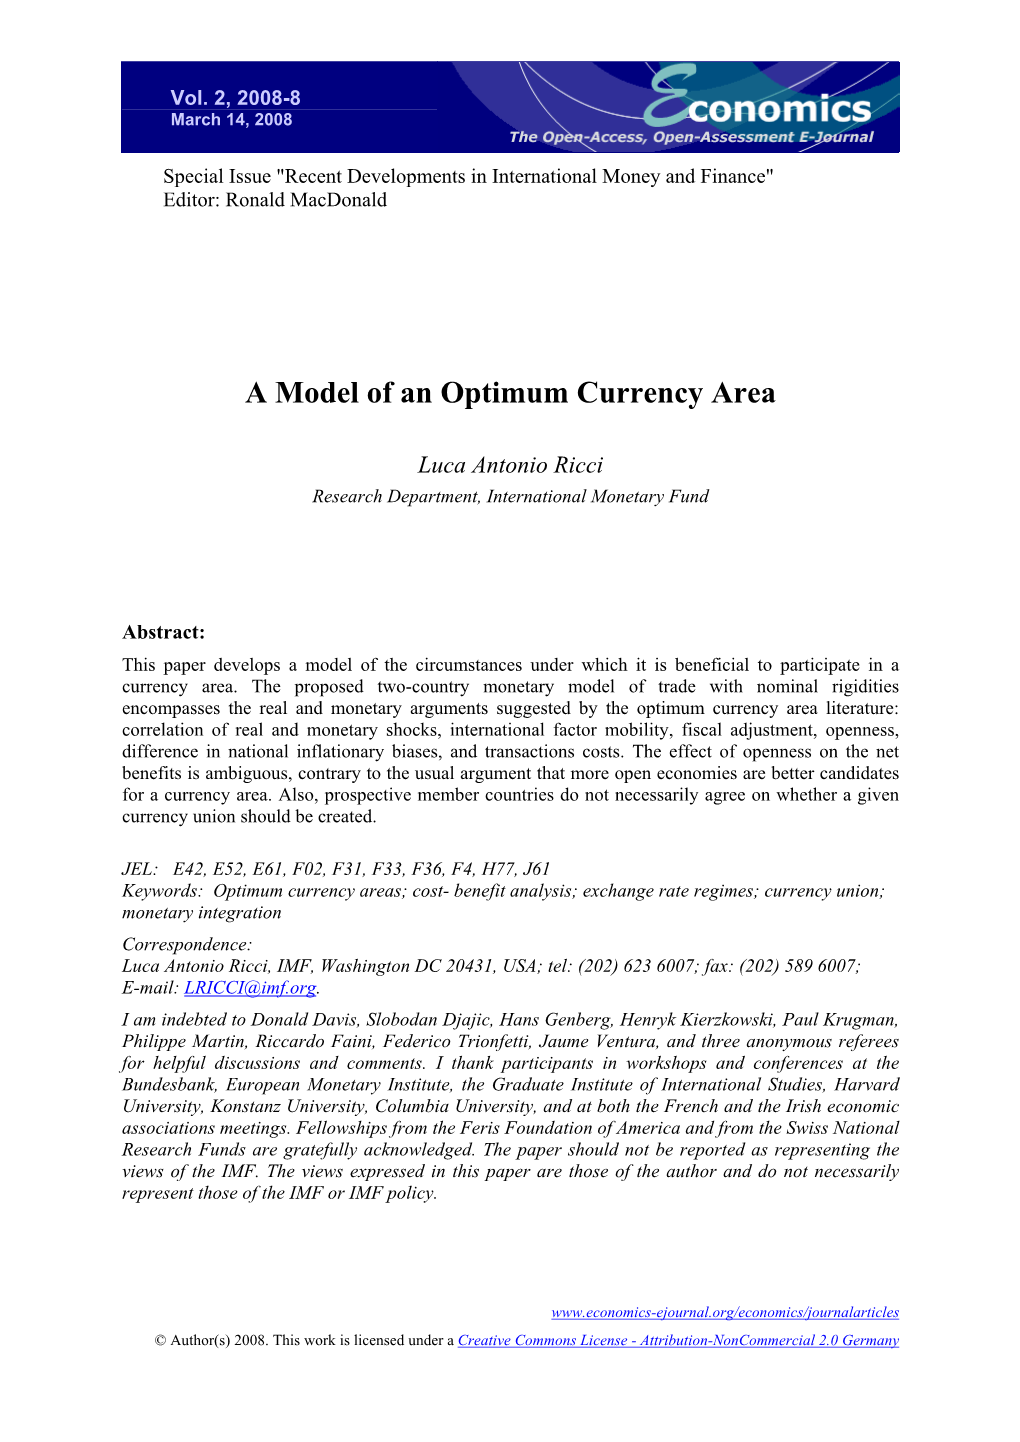 A Model of an Optimum Currency Area